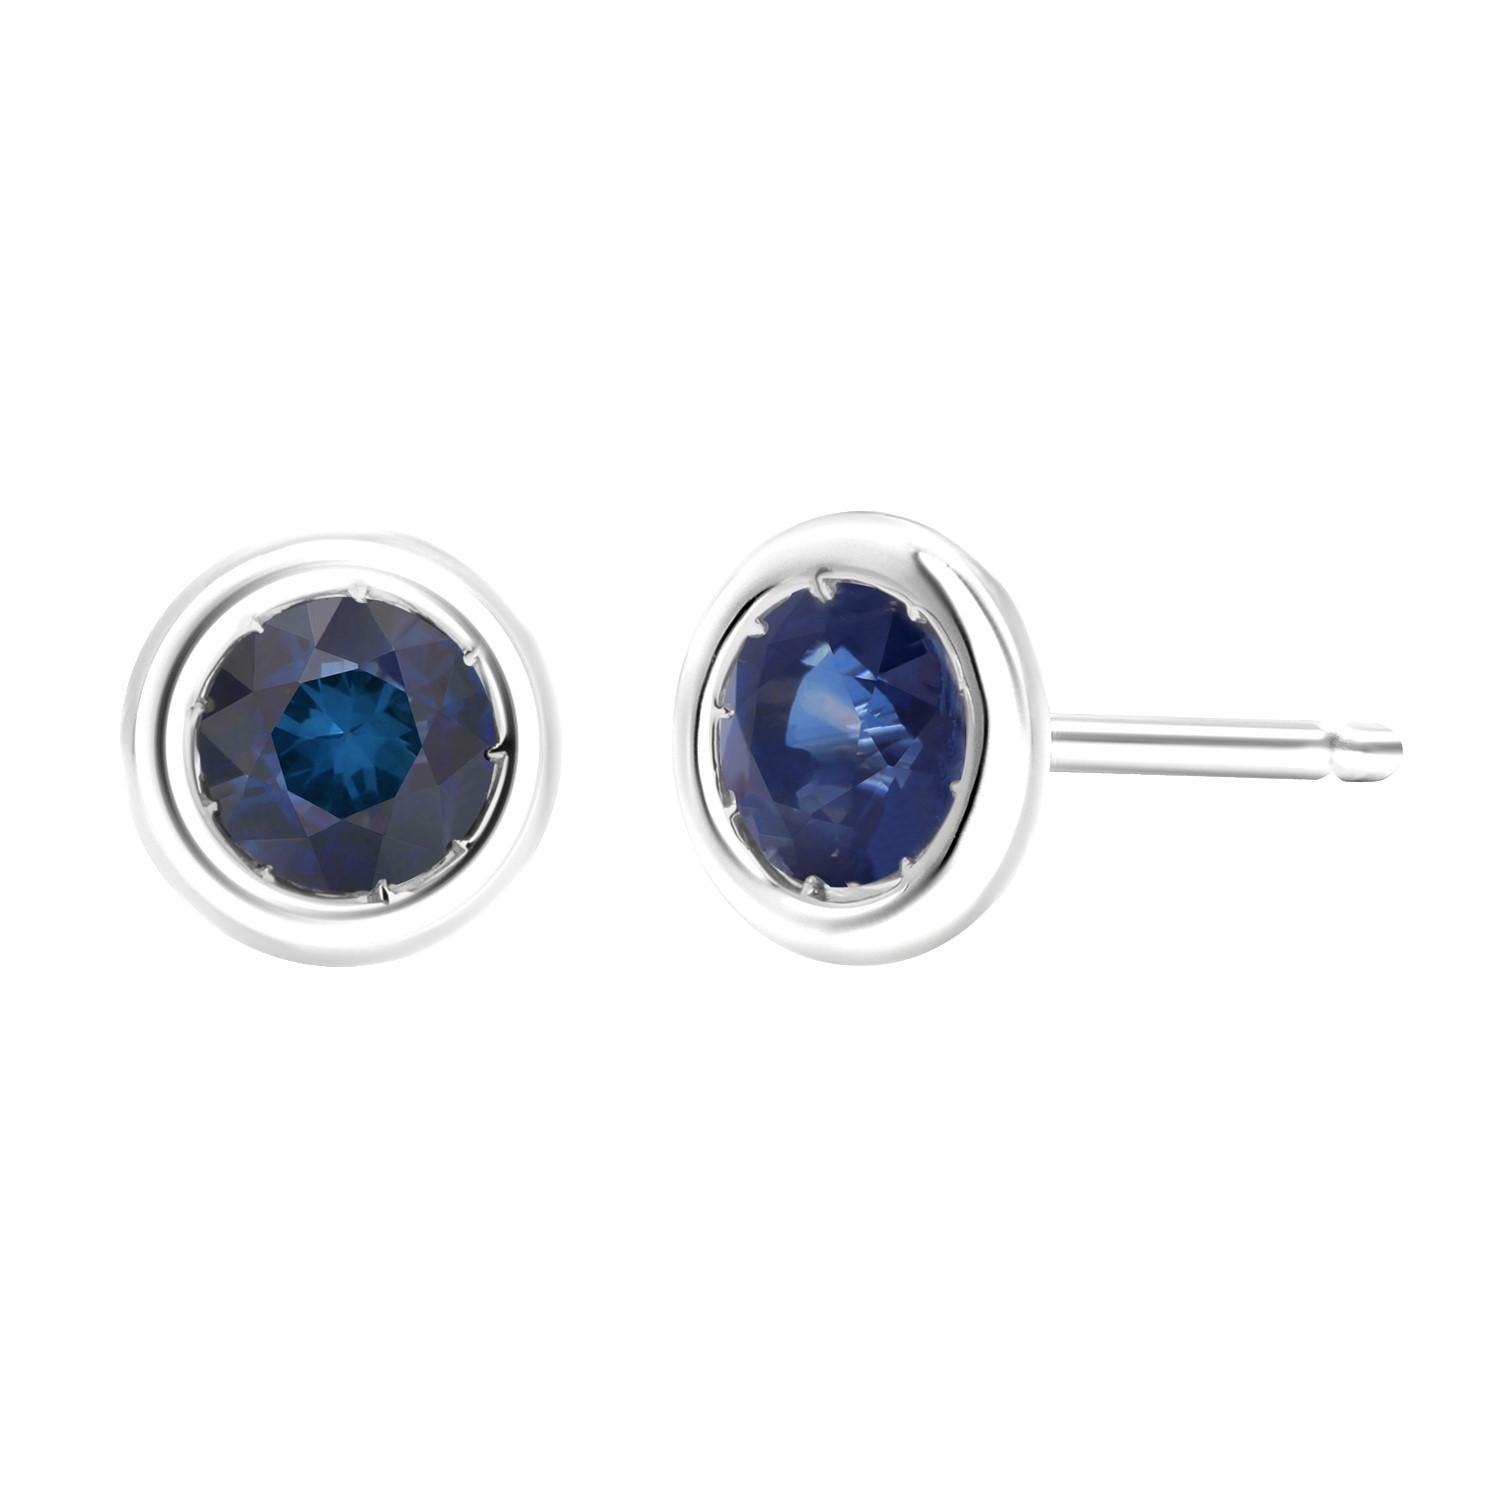 Matched Pair 4 Millimeter Round Sapphire Bezel Set White Gold Stud Earrings 1